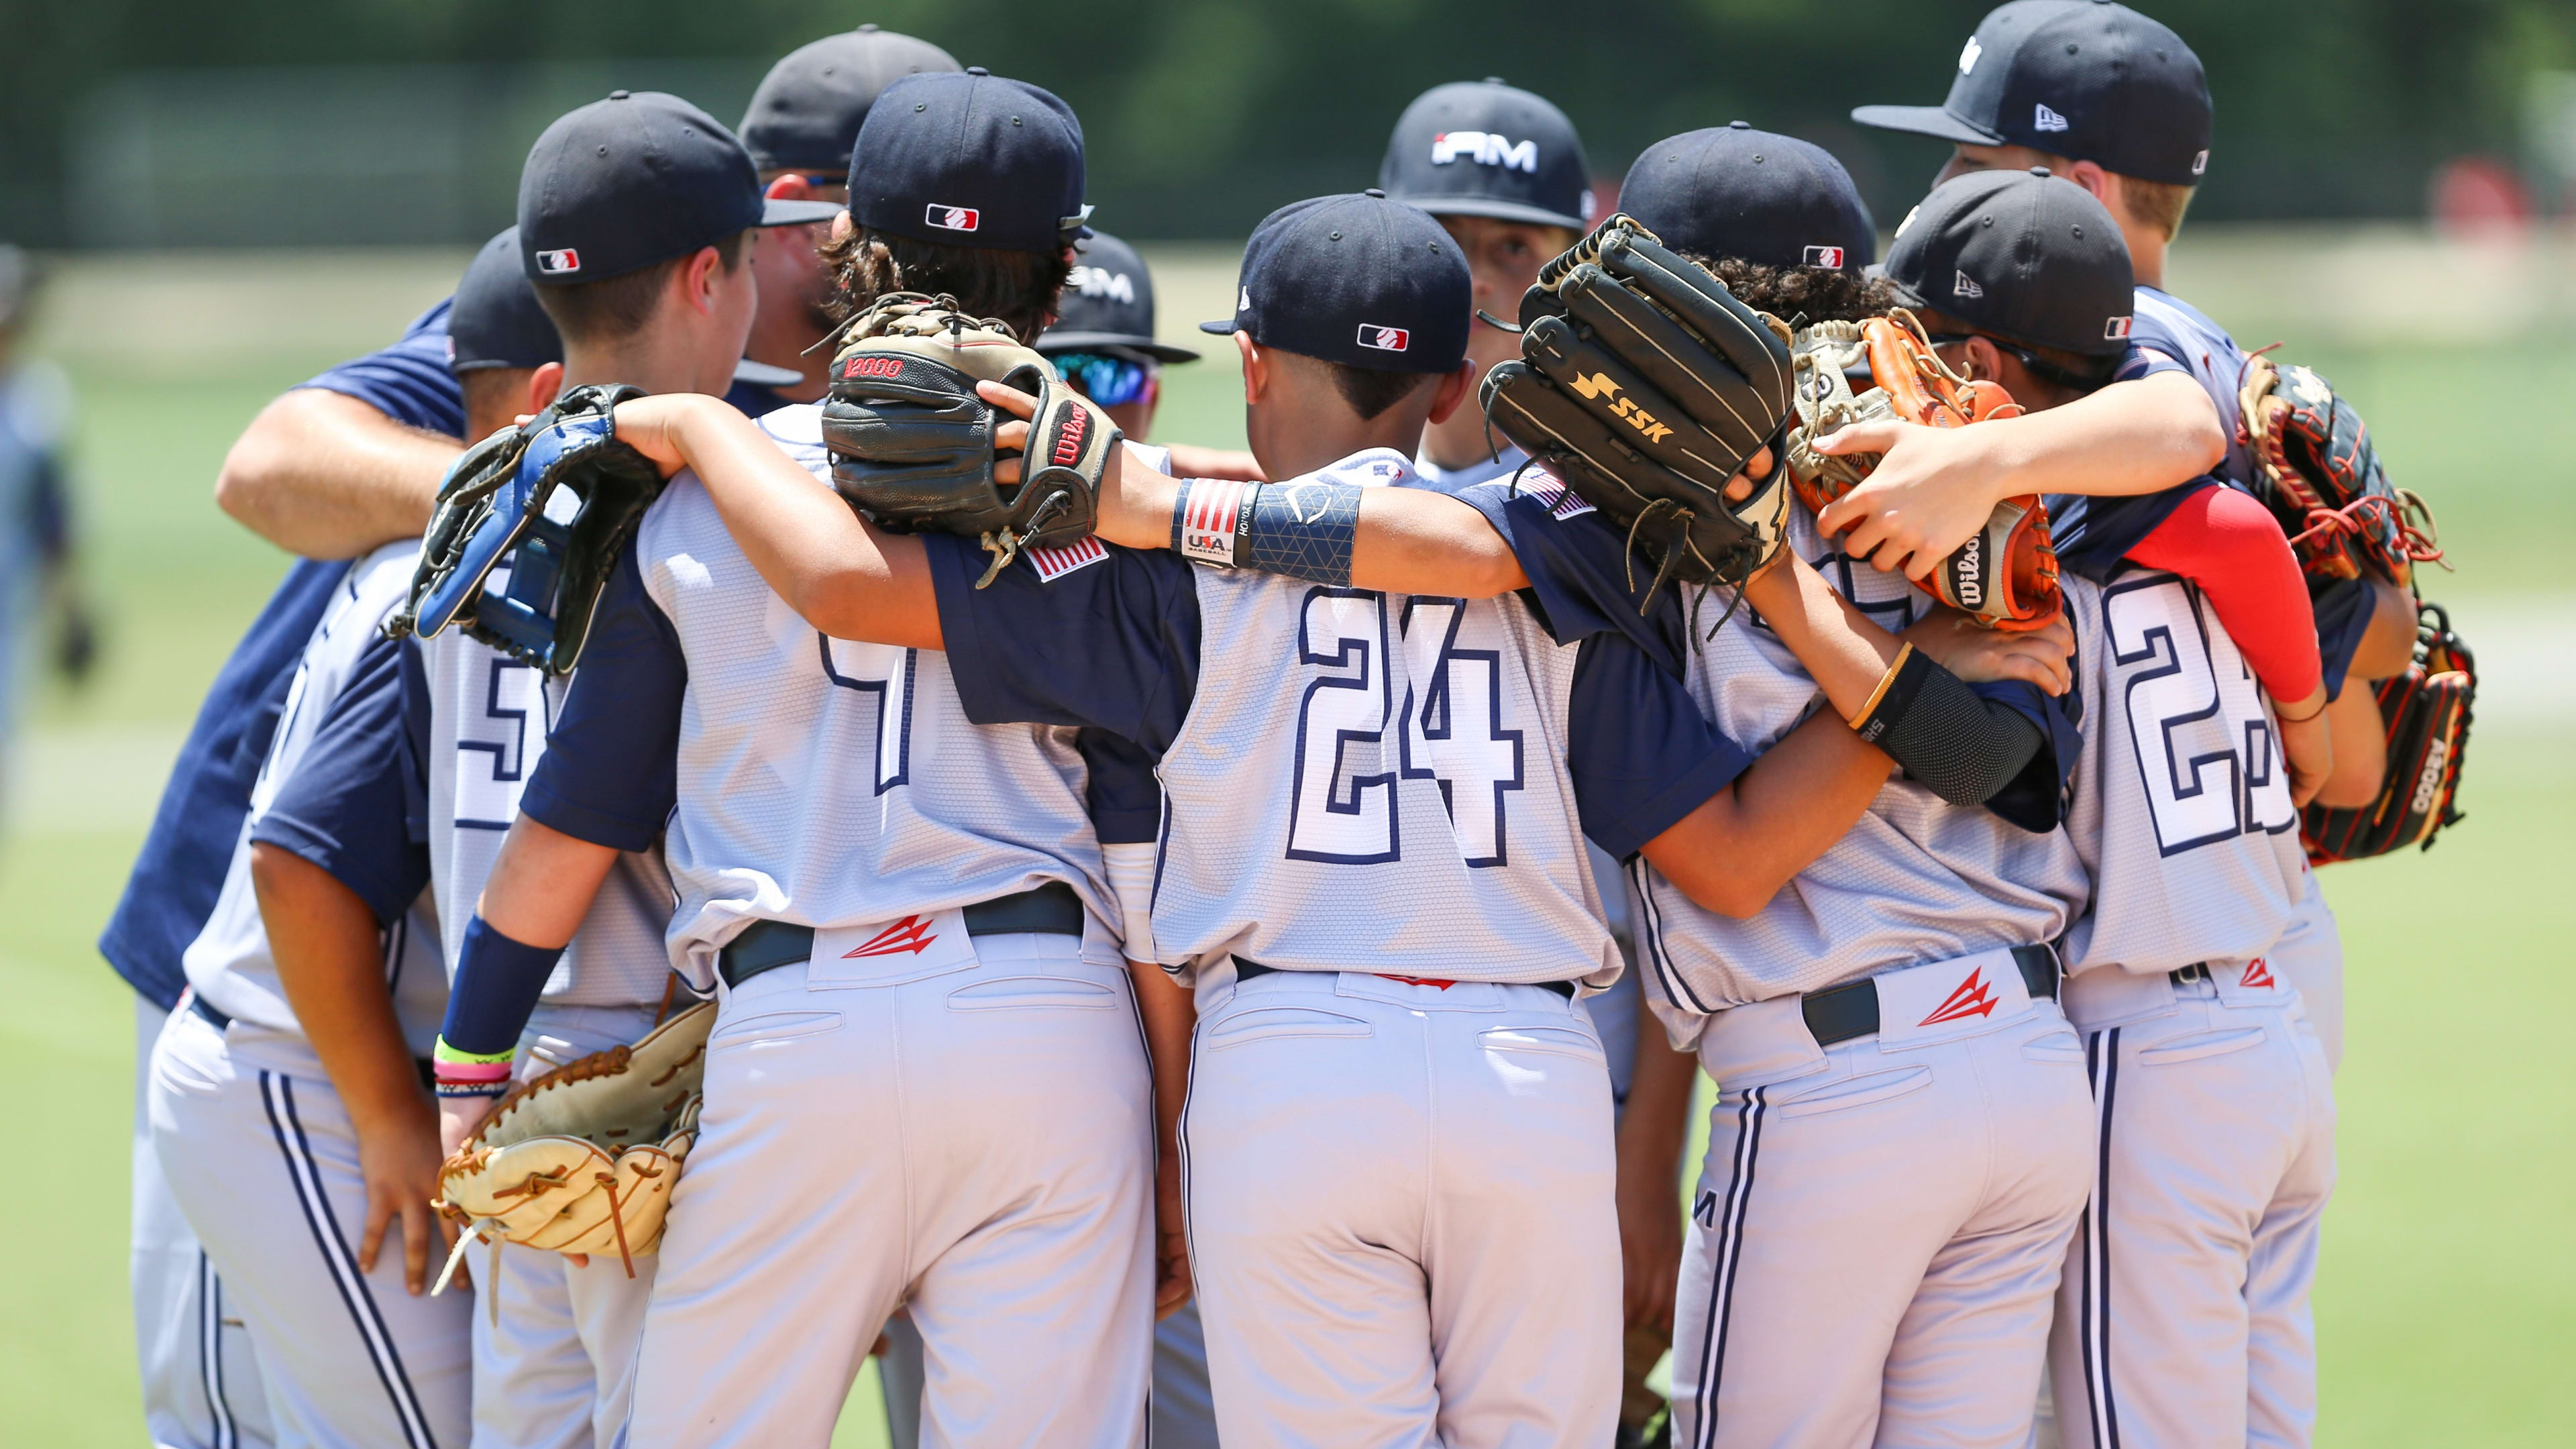 Team Ohio Comes From Behind to Claim Youth Tier II 18U 3A National Title